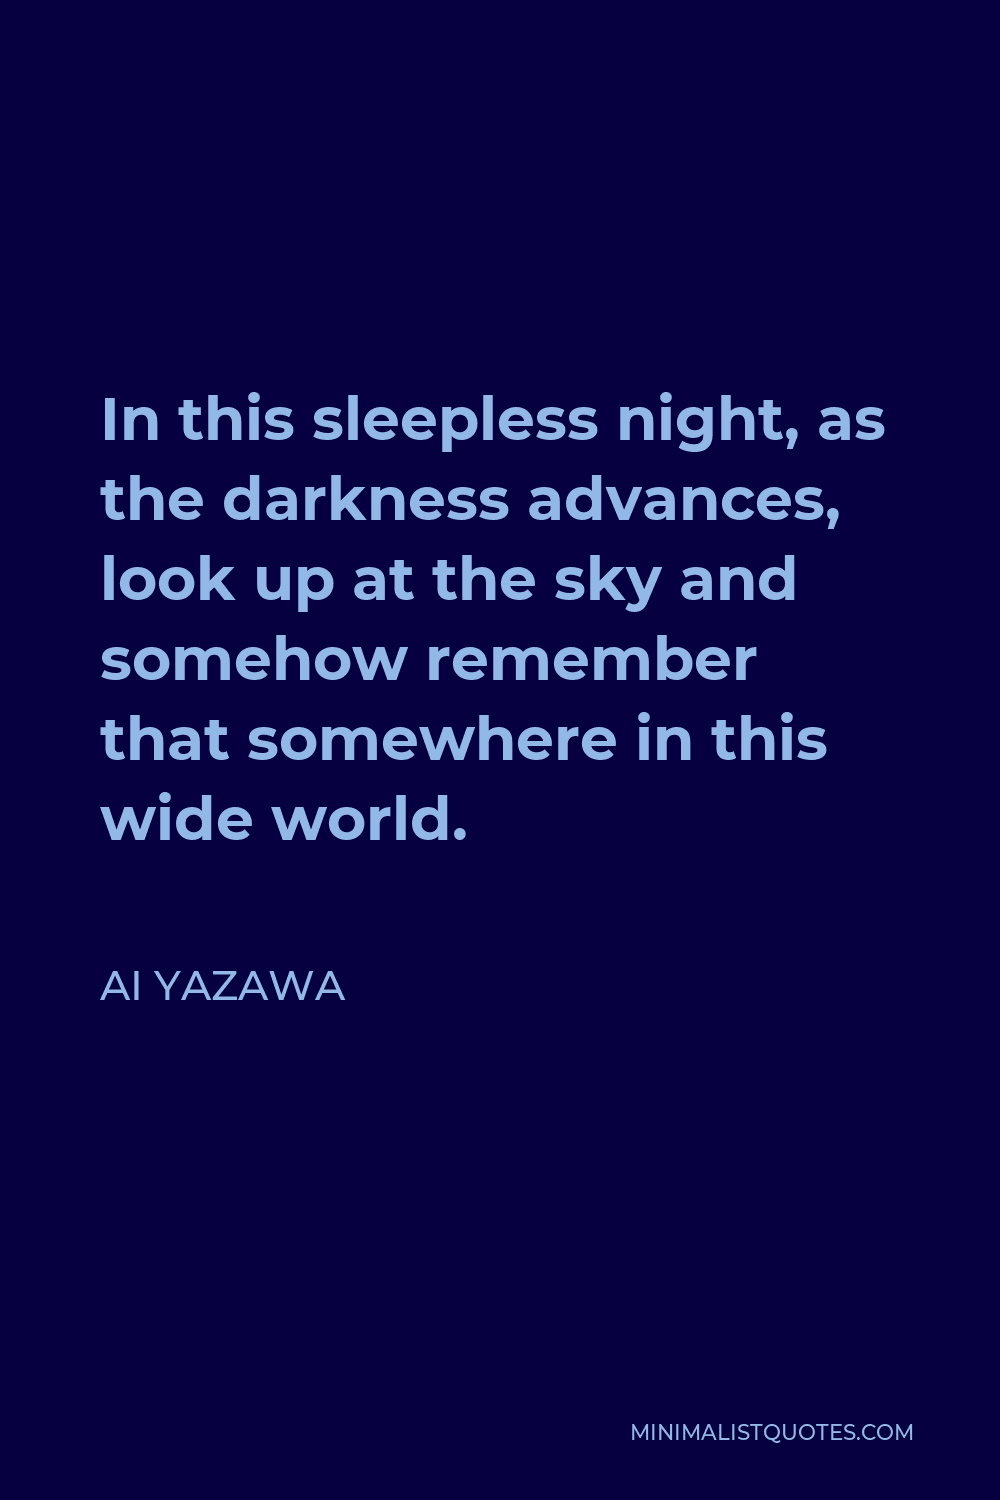 Ai Yazawa Quote - In this sleepless night, as the darkness advances, look up at the sky and somehow remember that somewhere in this wide world.